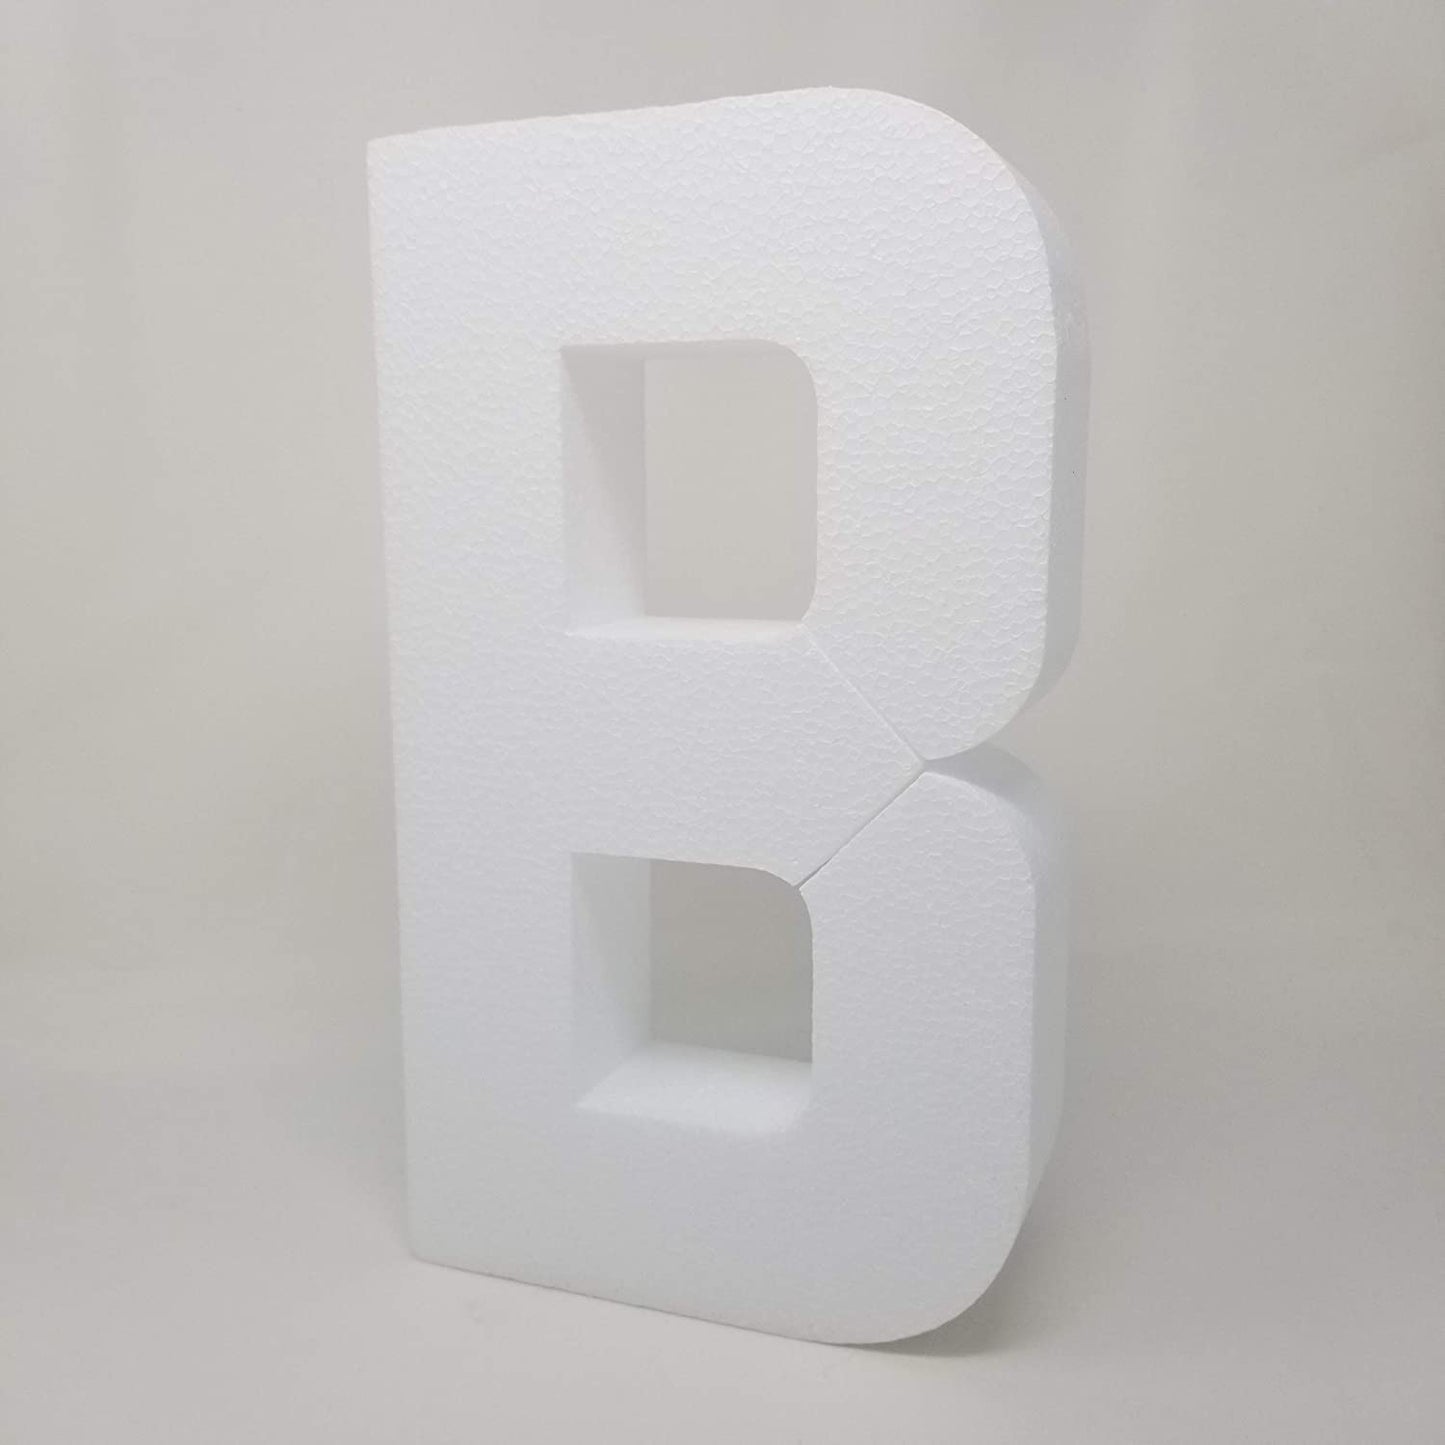 Foam Letter and Number Shapes - 12" Tall